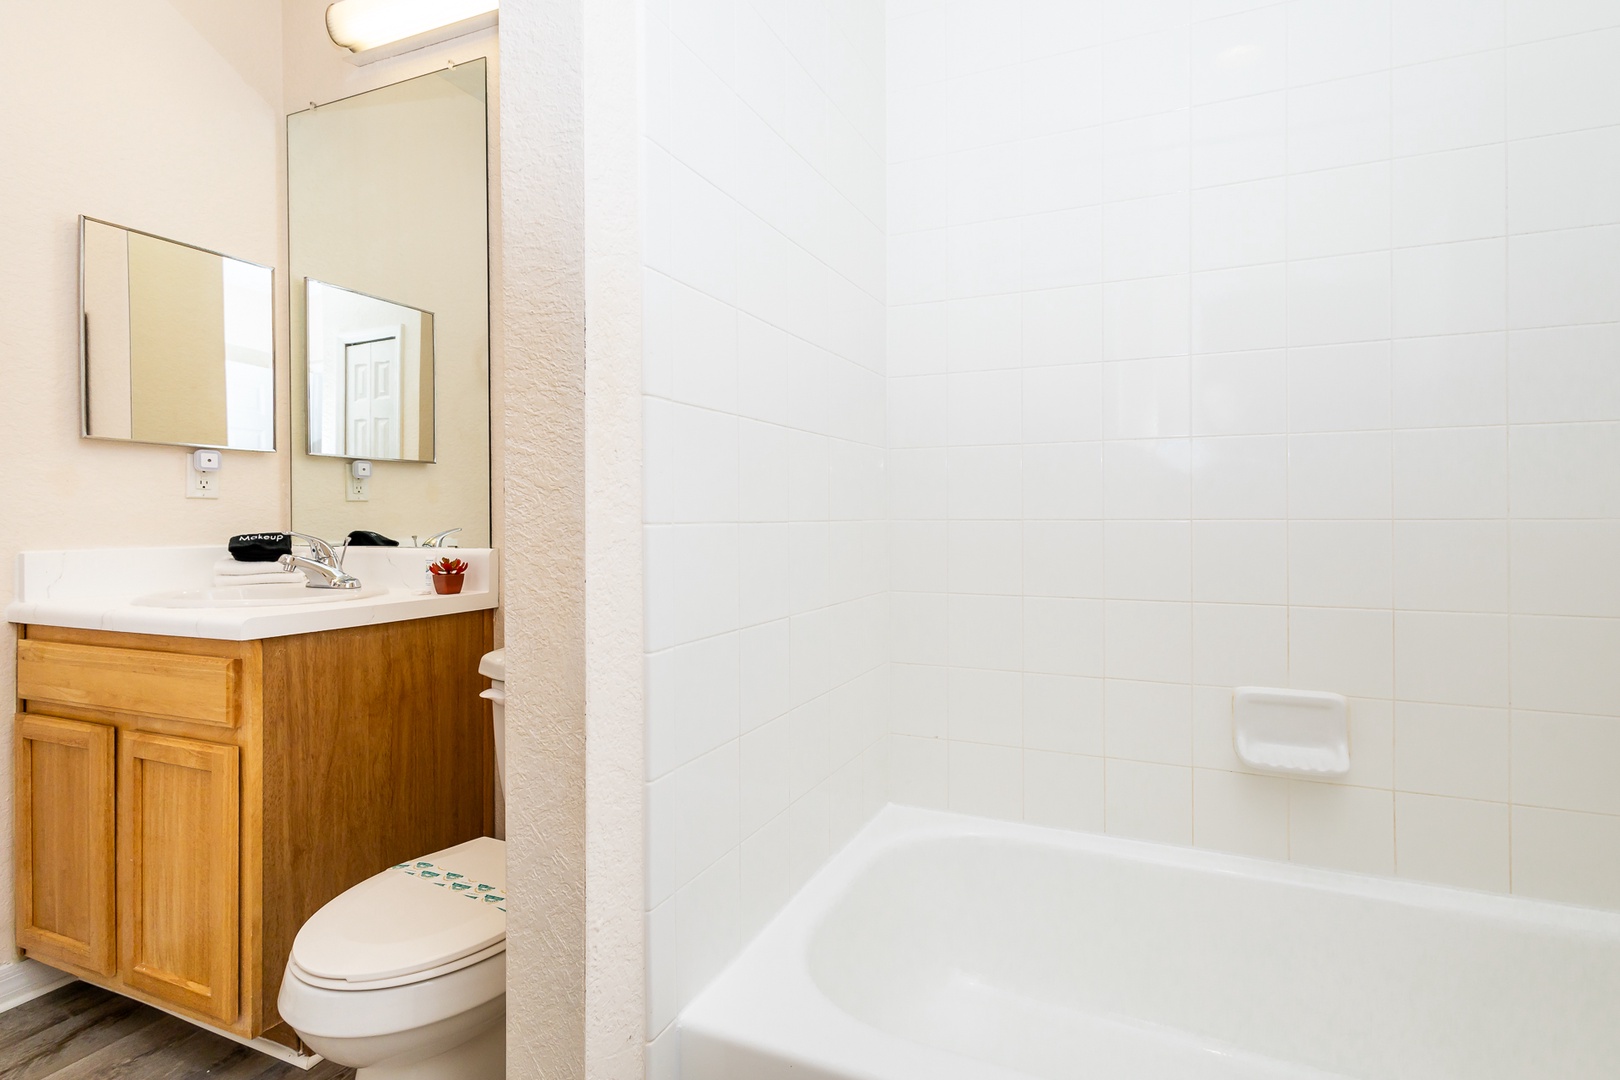 The shared ensuite contains a single vanity & shower/tub combo